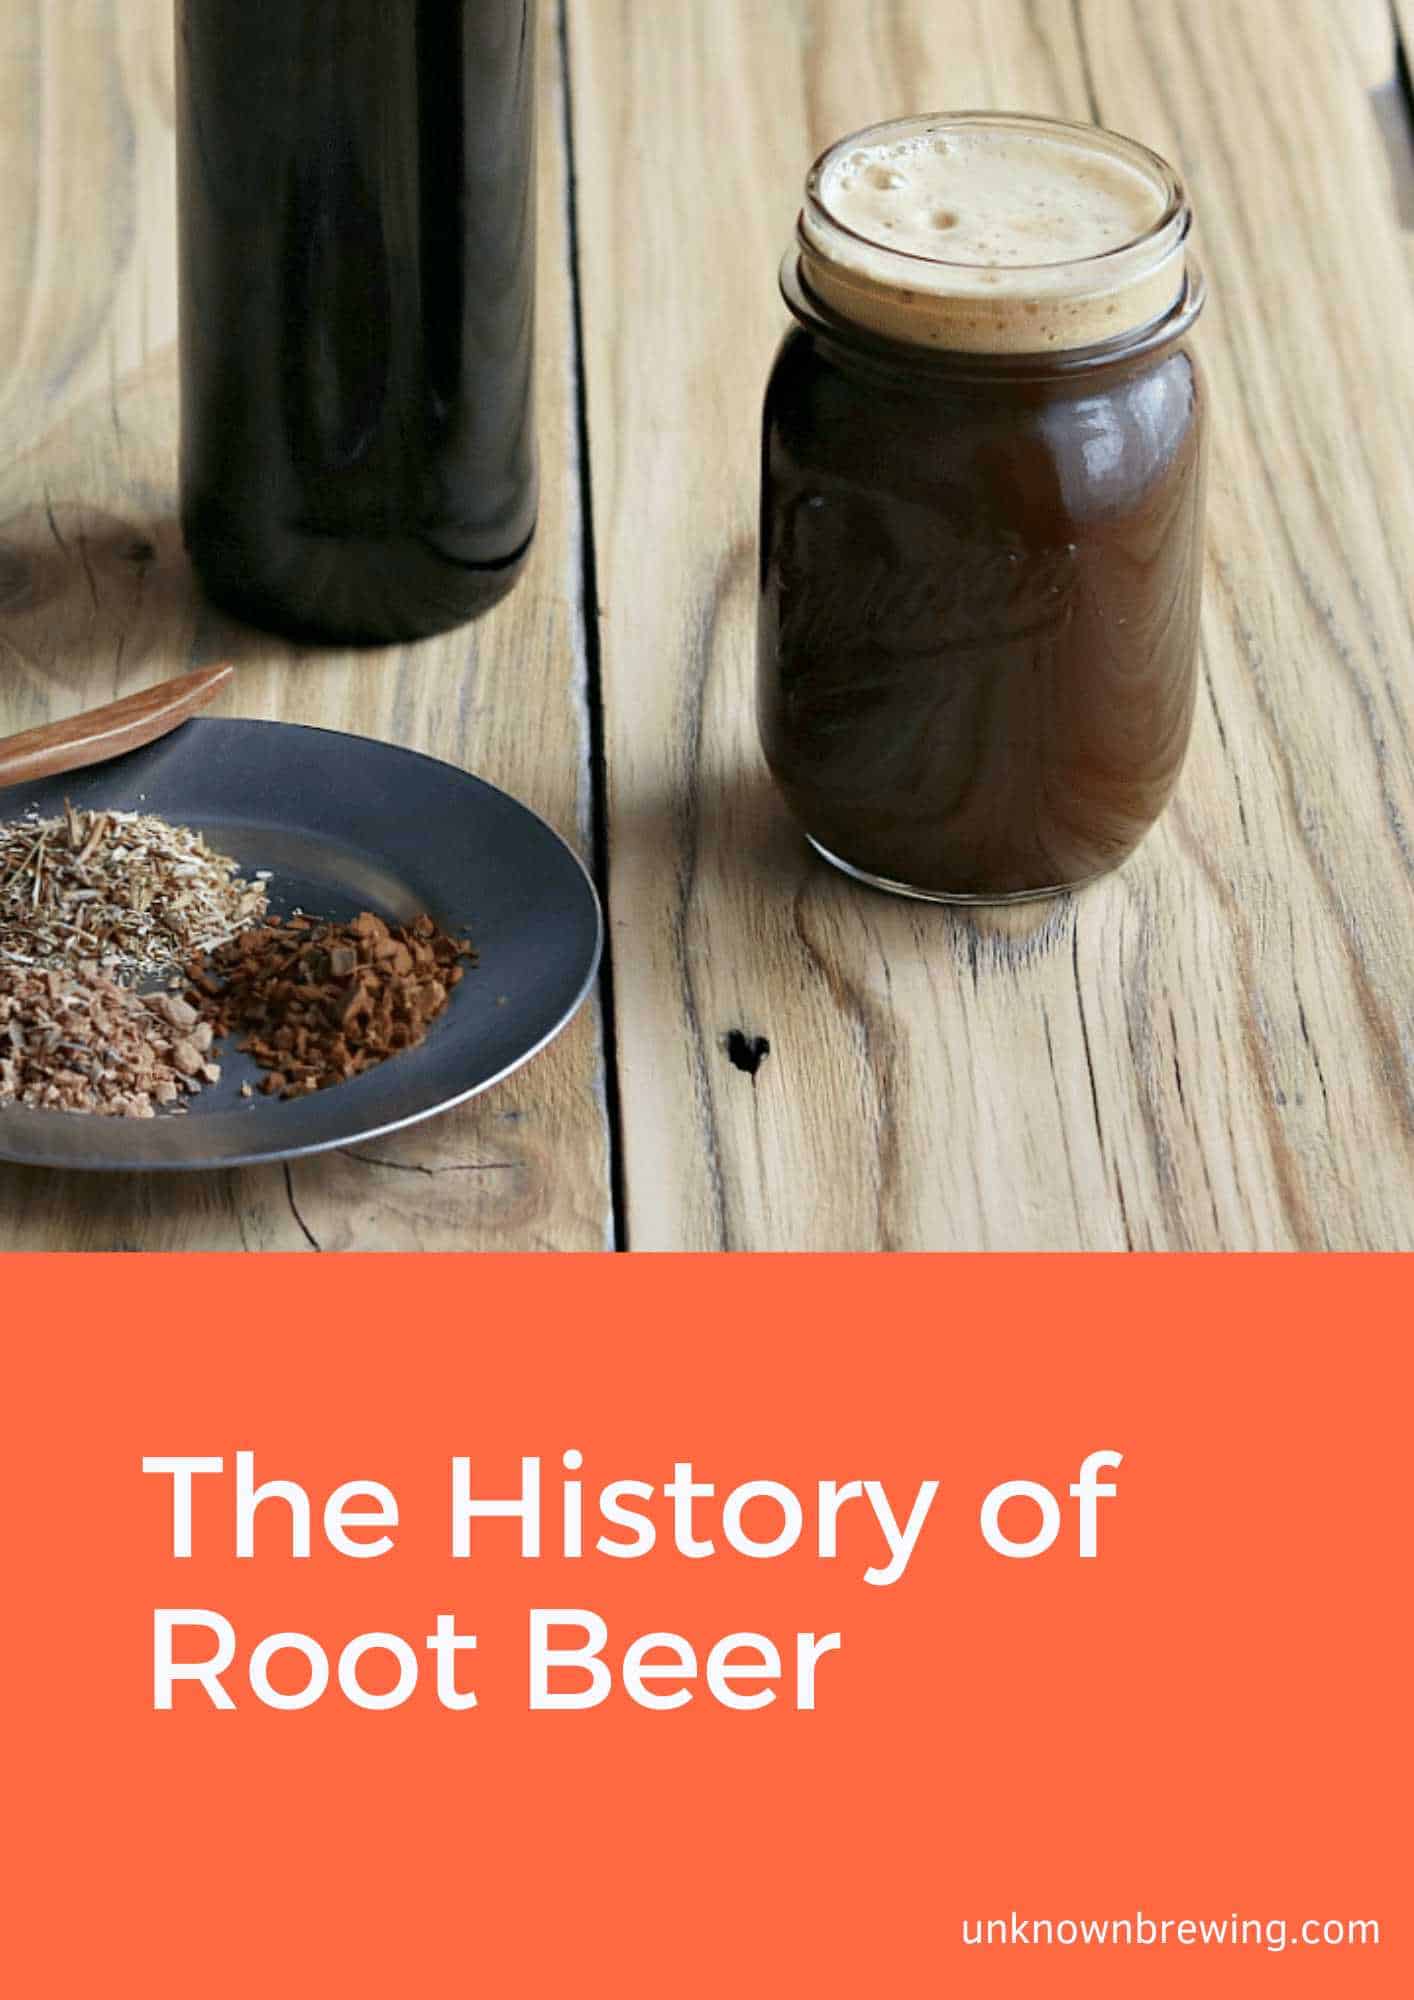 The History of Root Beer